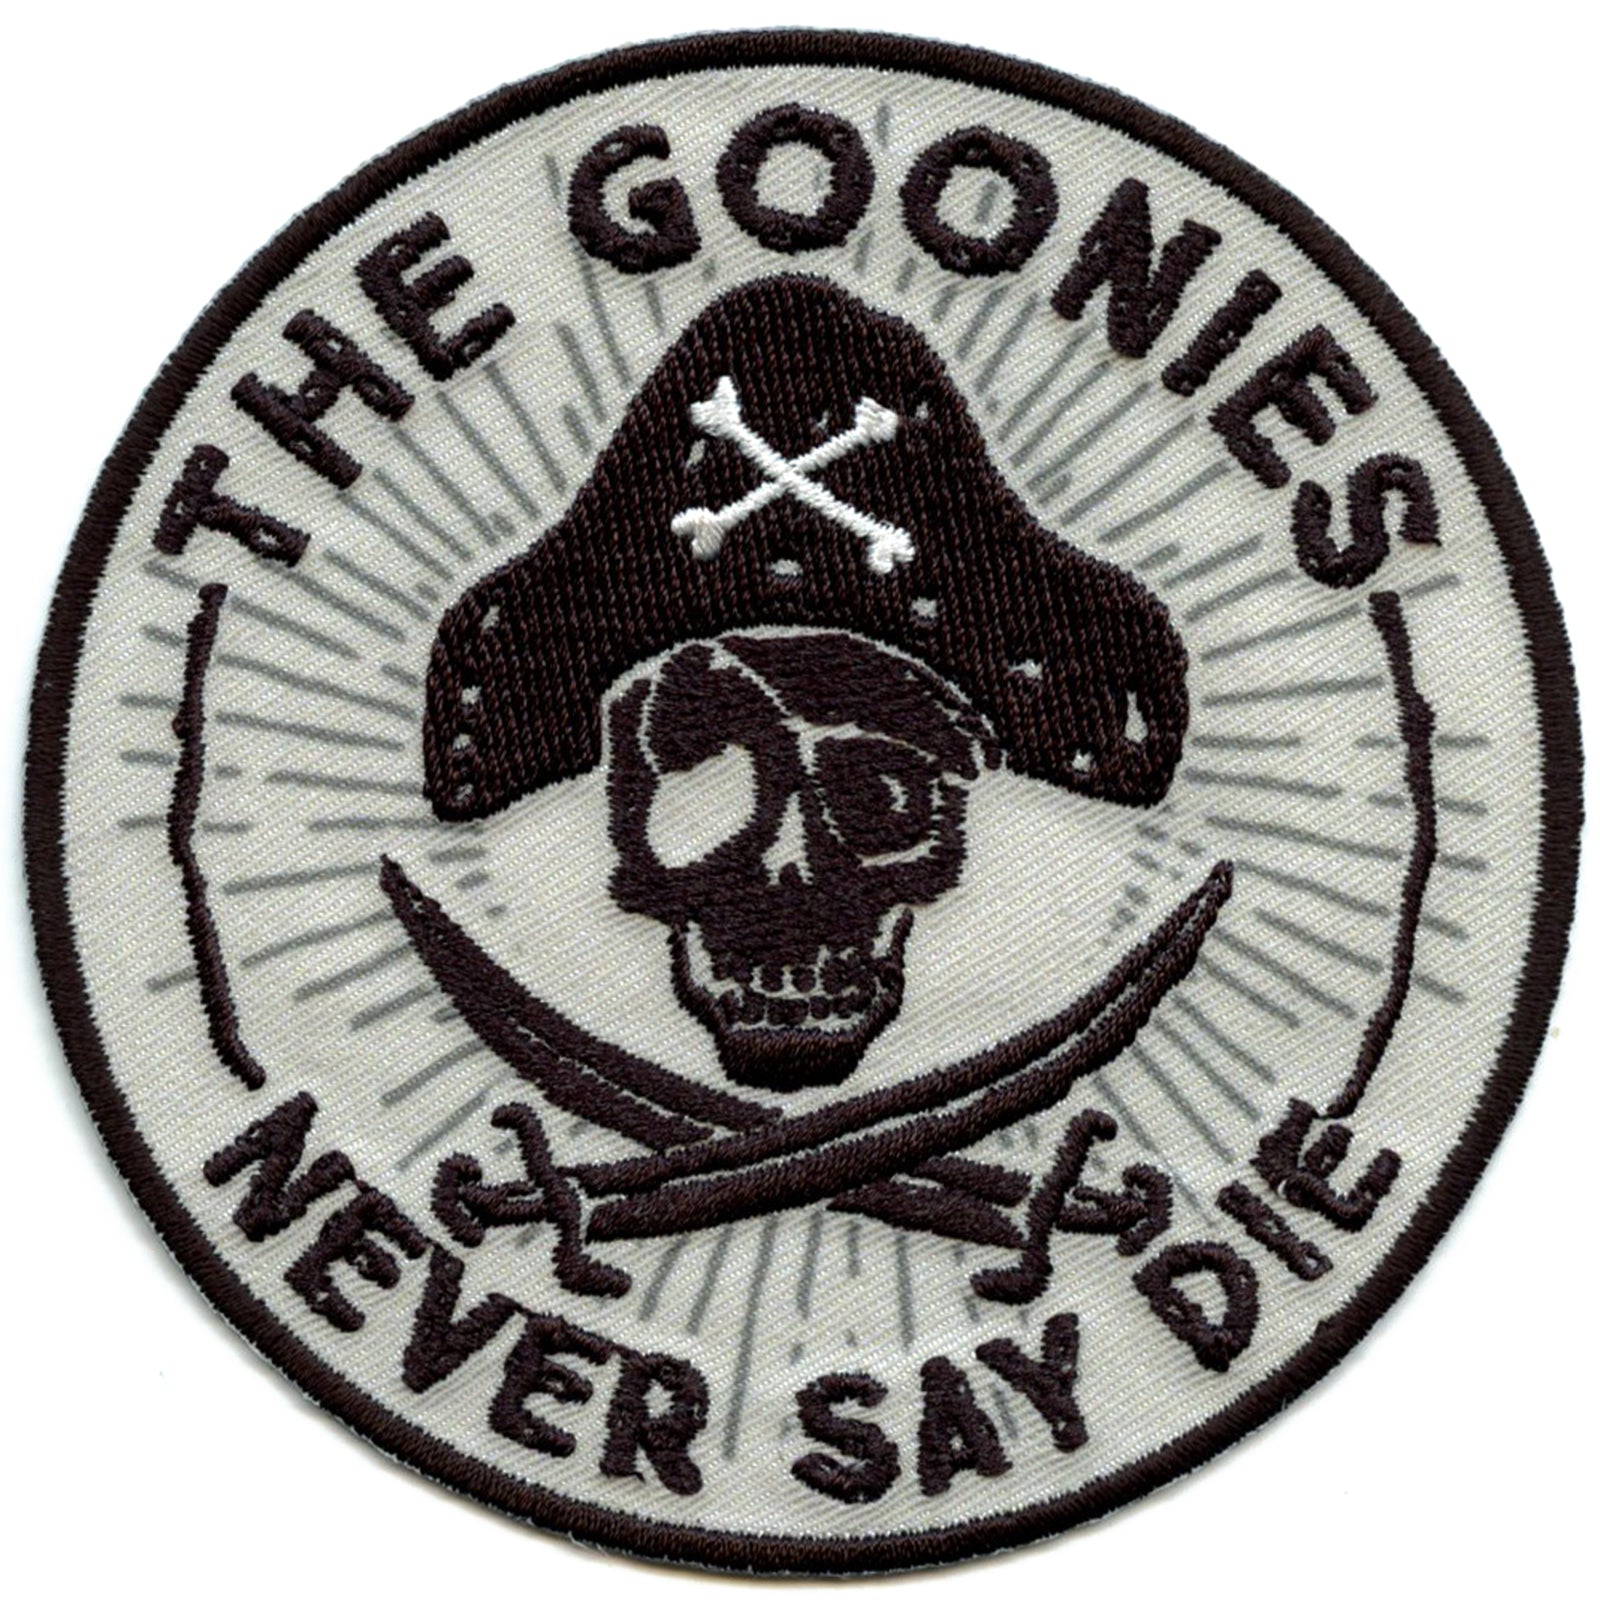 The Goonies Never Say Die Cute Patch Embroidered Fabric Applique Funny Patches Tactical Military Morale Combat Armband Badges